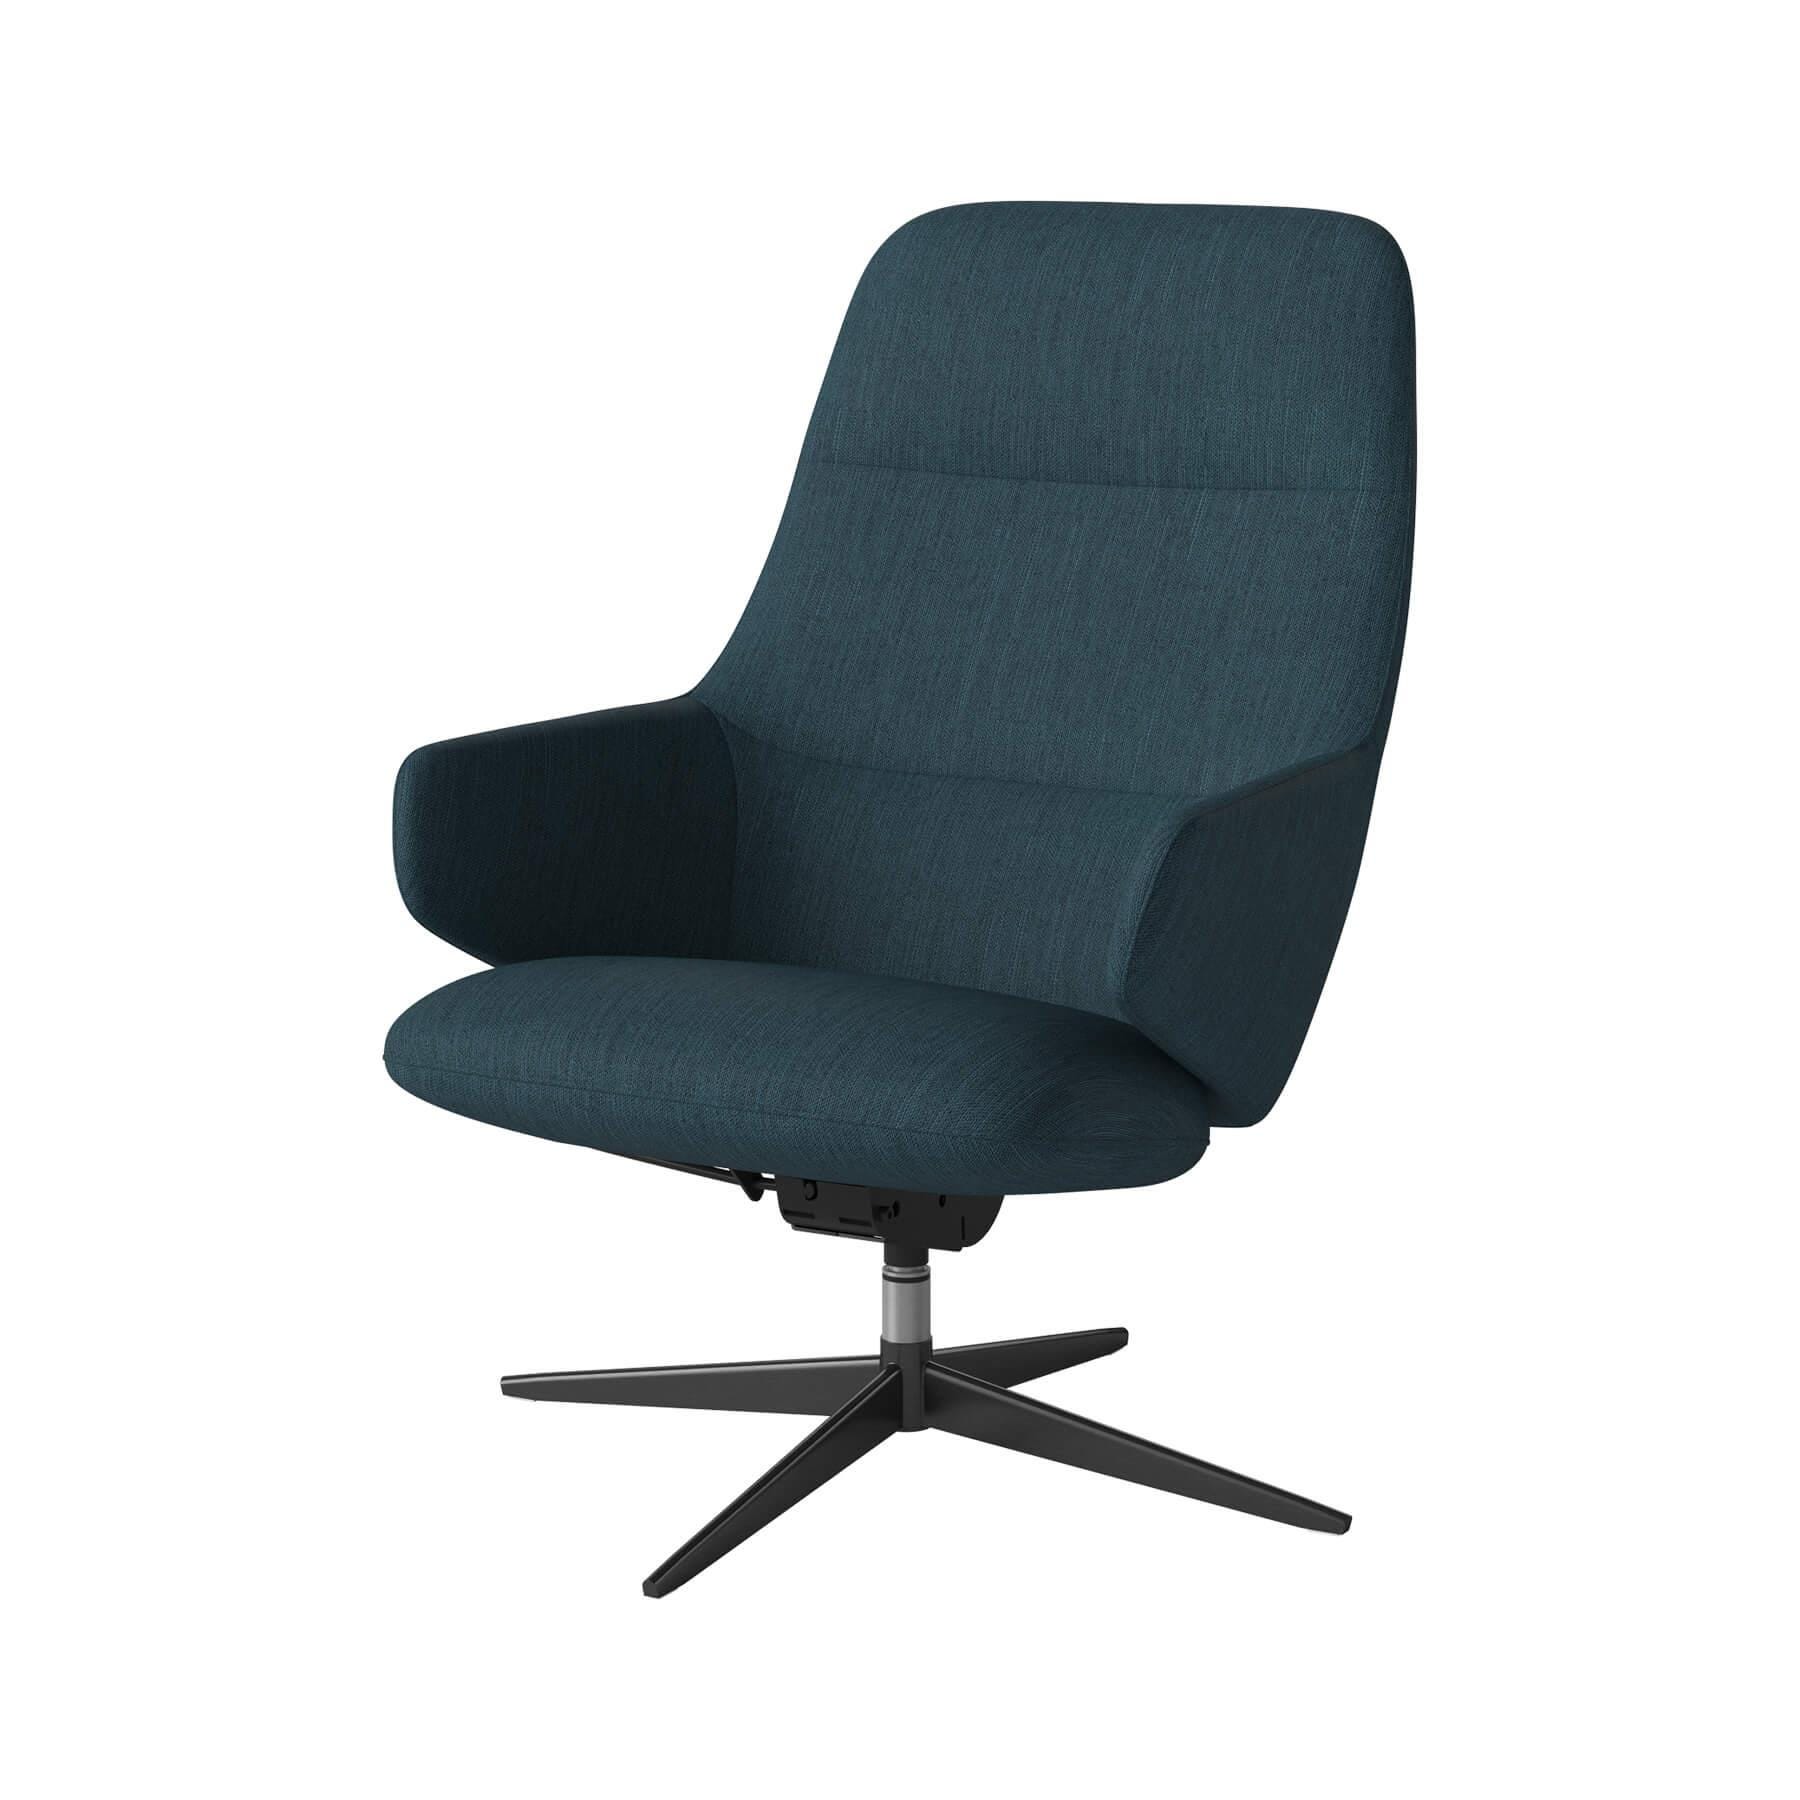 Bolia Clara Armchair Black Laquered Steel Baize Dust Blue Designer Furniture From Holloways Of Ludlow